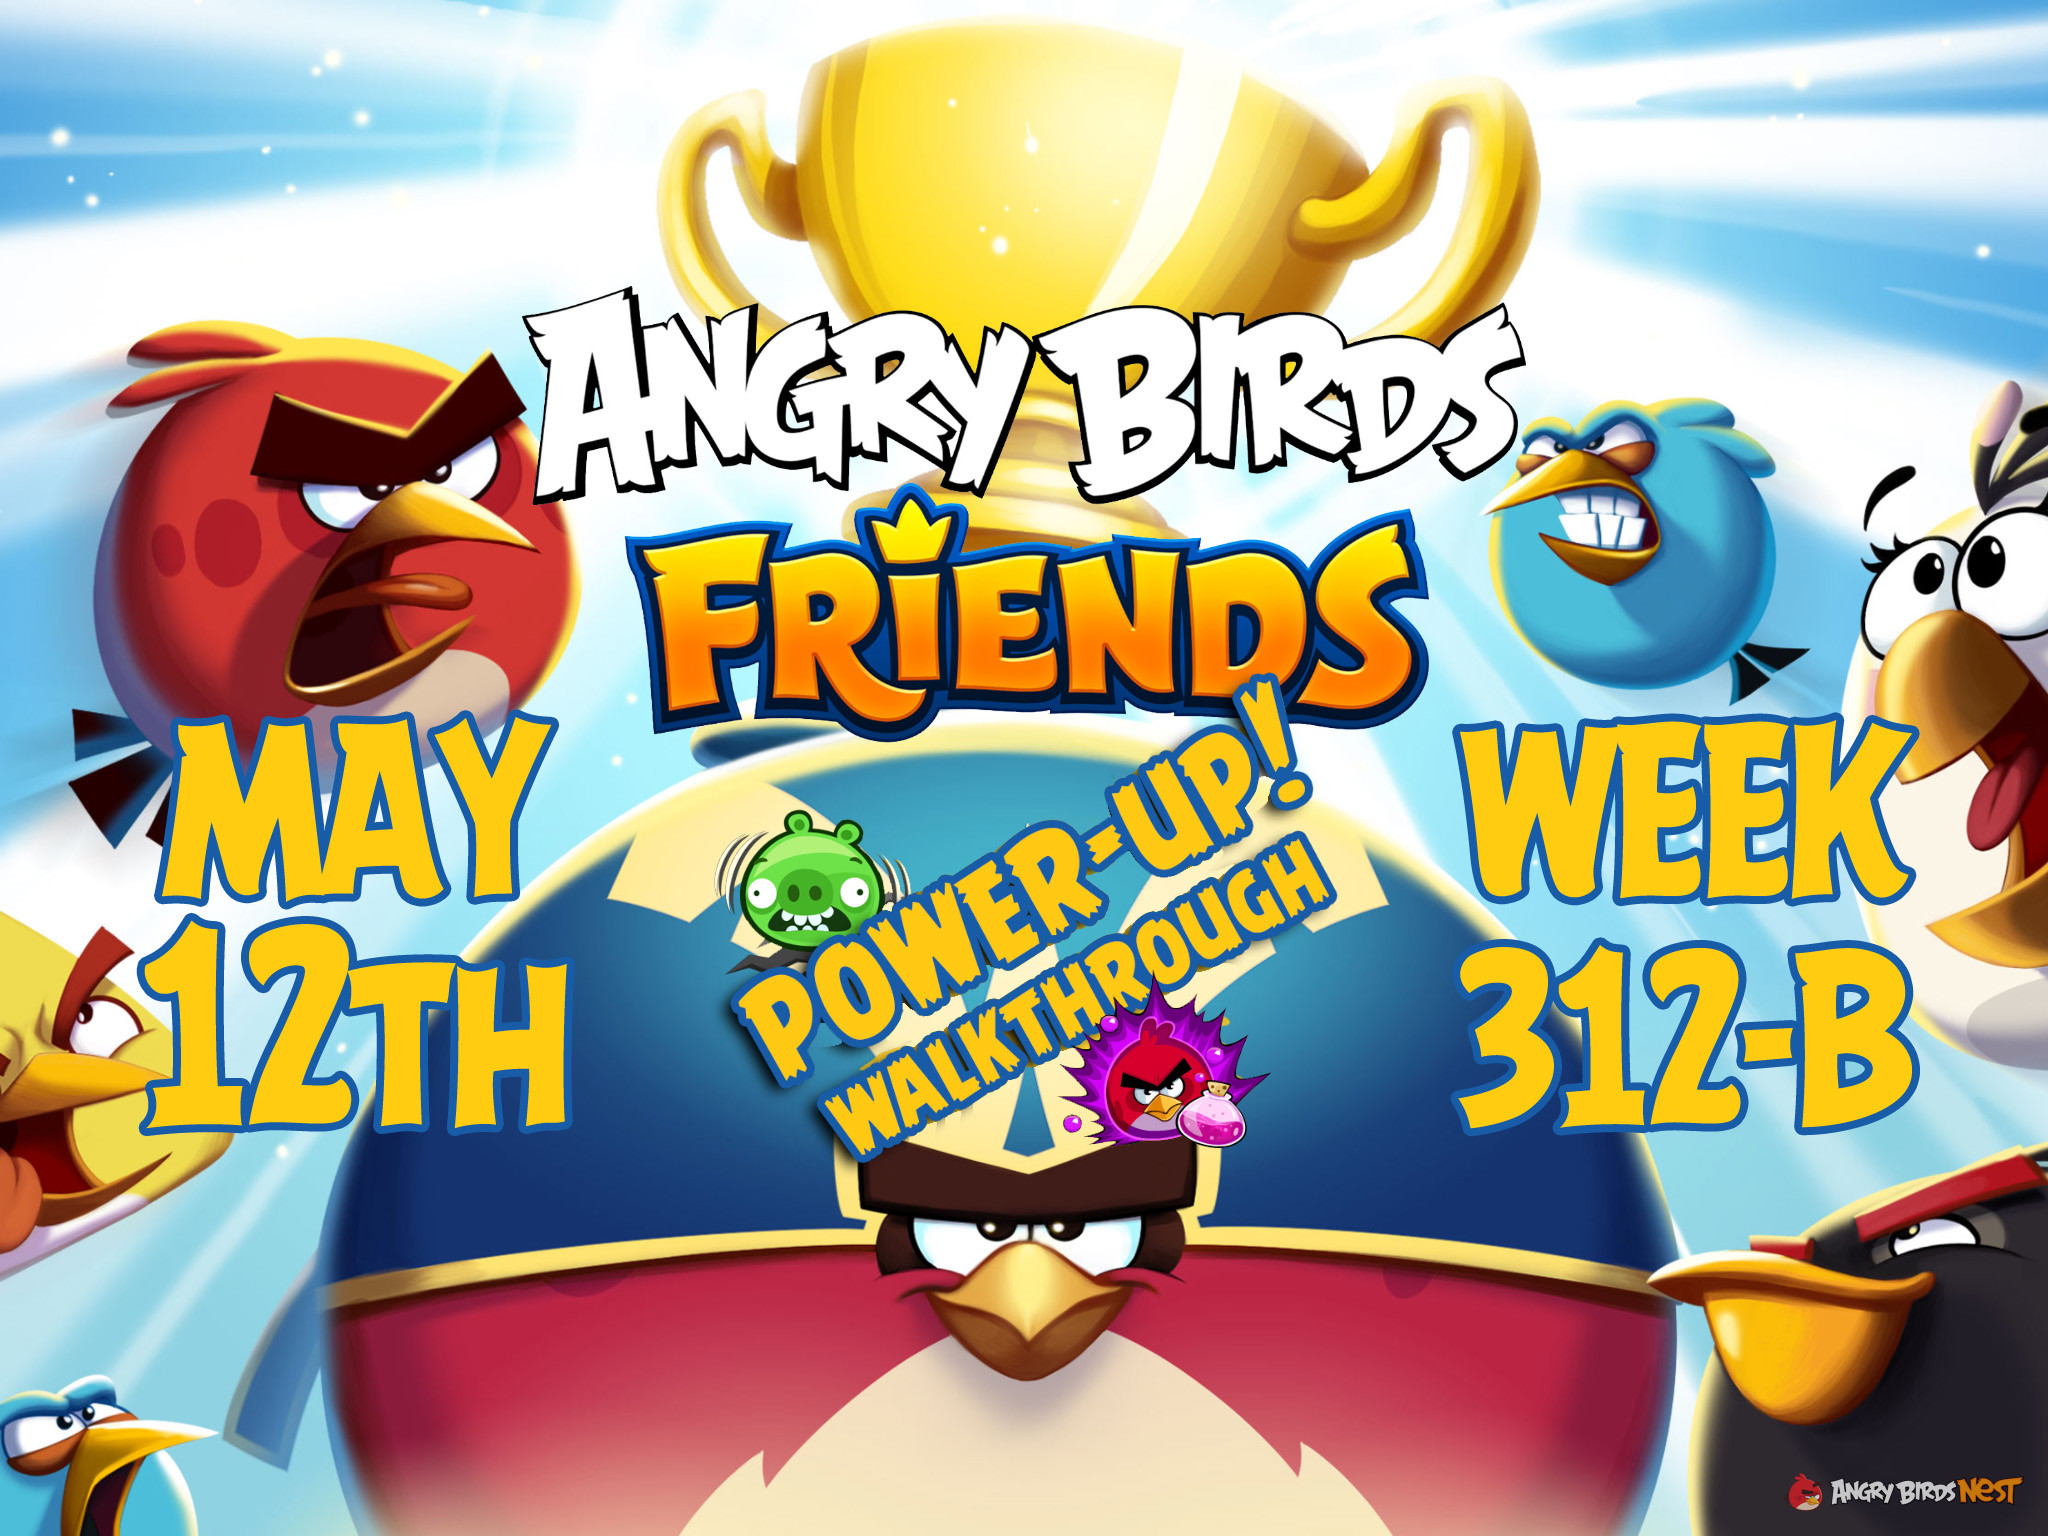 Angry Birds Friends Tournament Week 312-B Feature Image PU